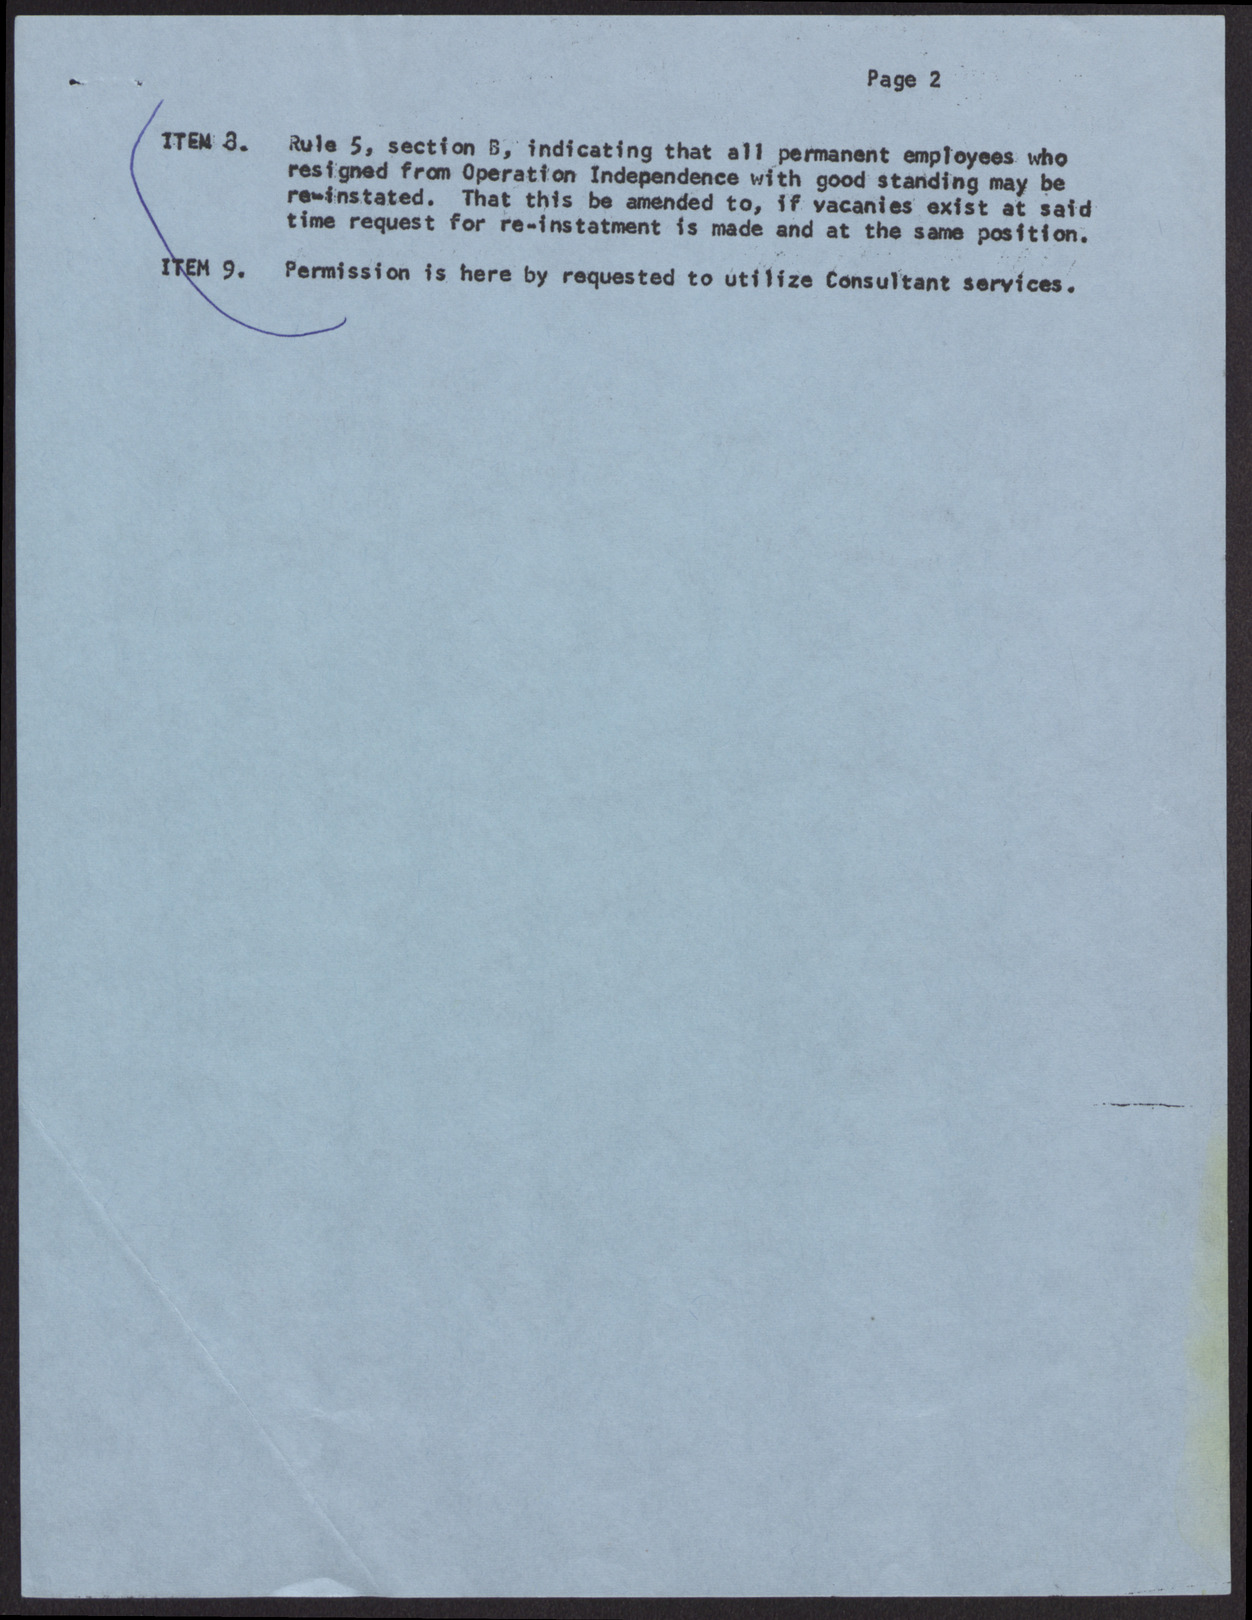 Letter to the Executive Committee of Operation Independence from George Gant (2 pages), August 8, 1967, page 2